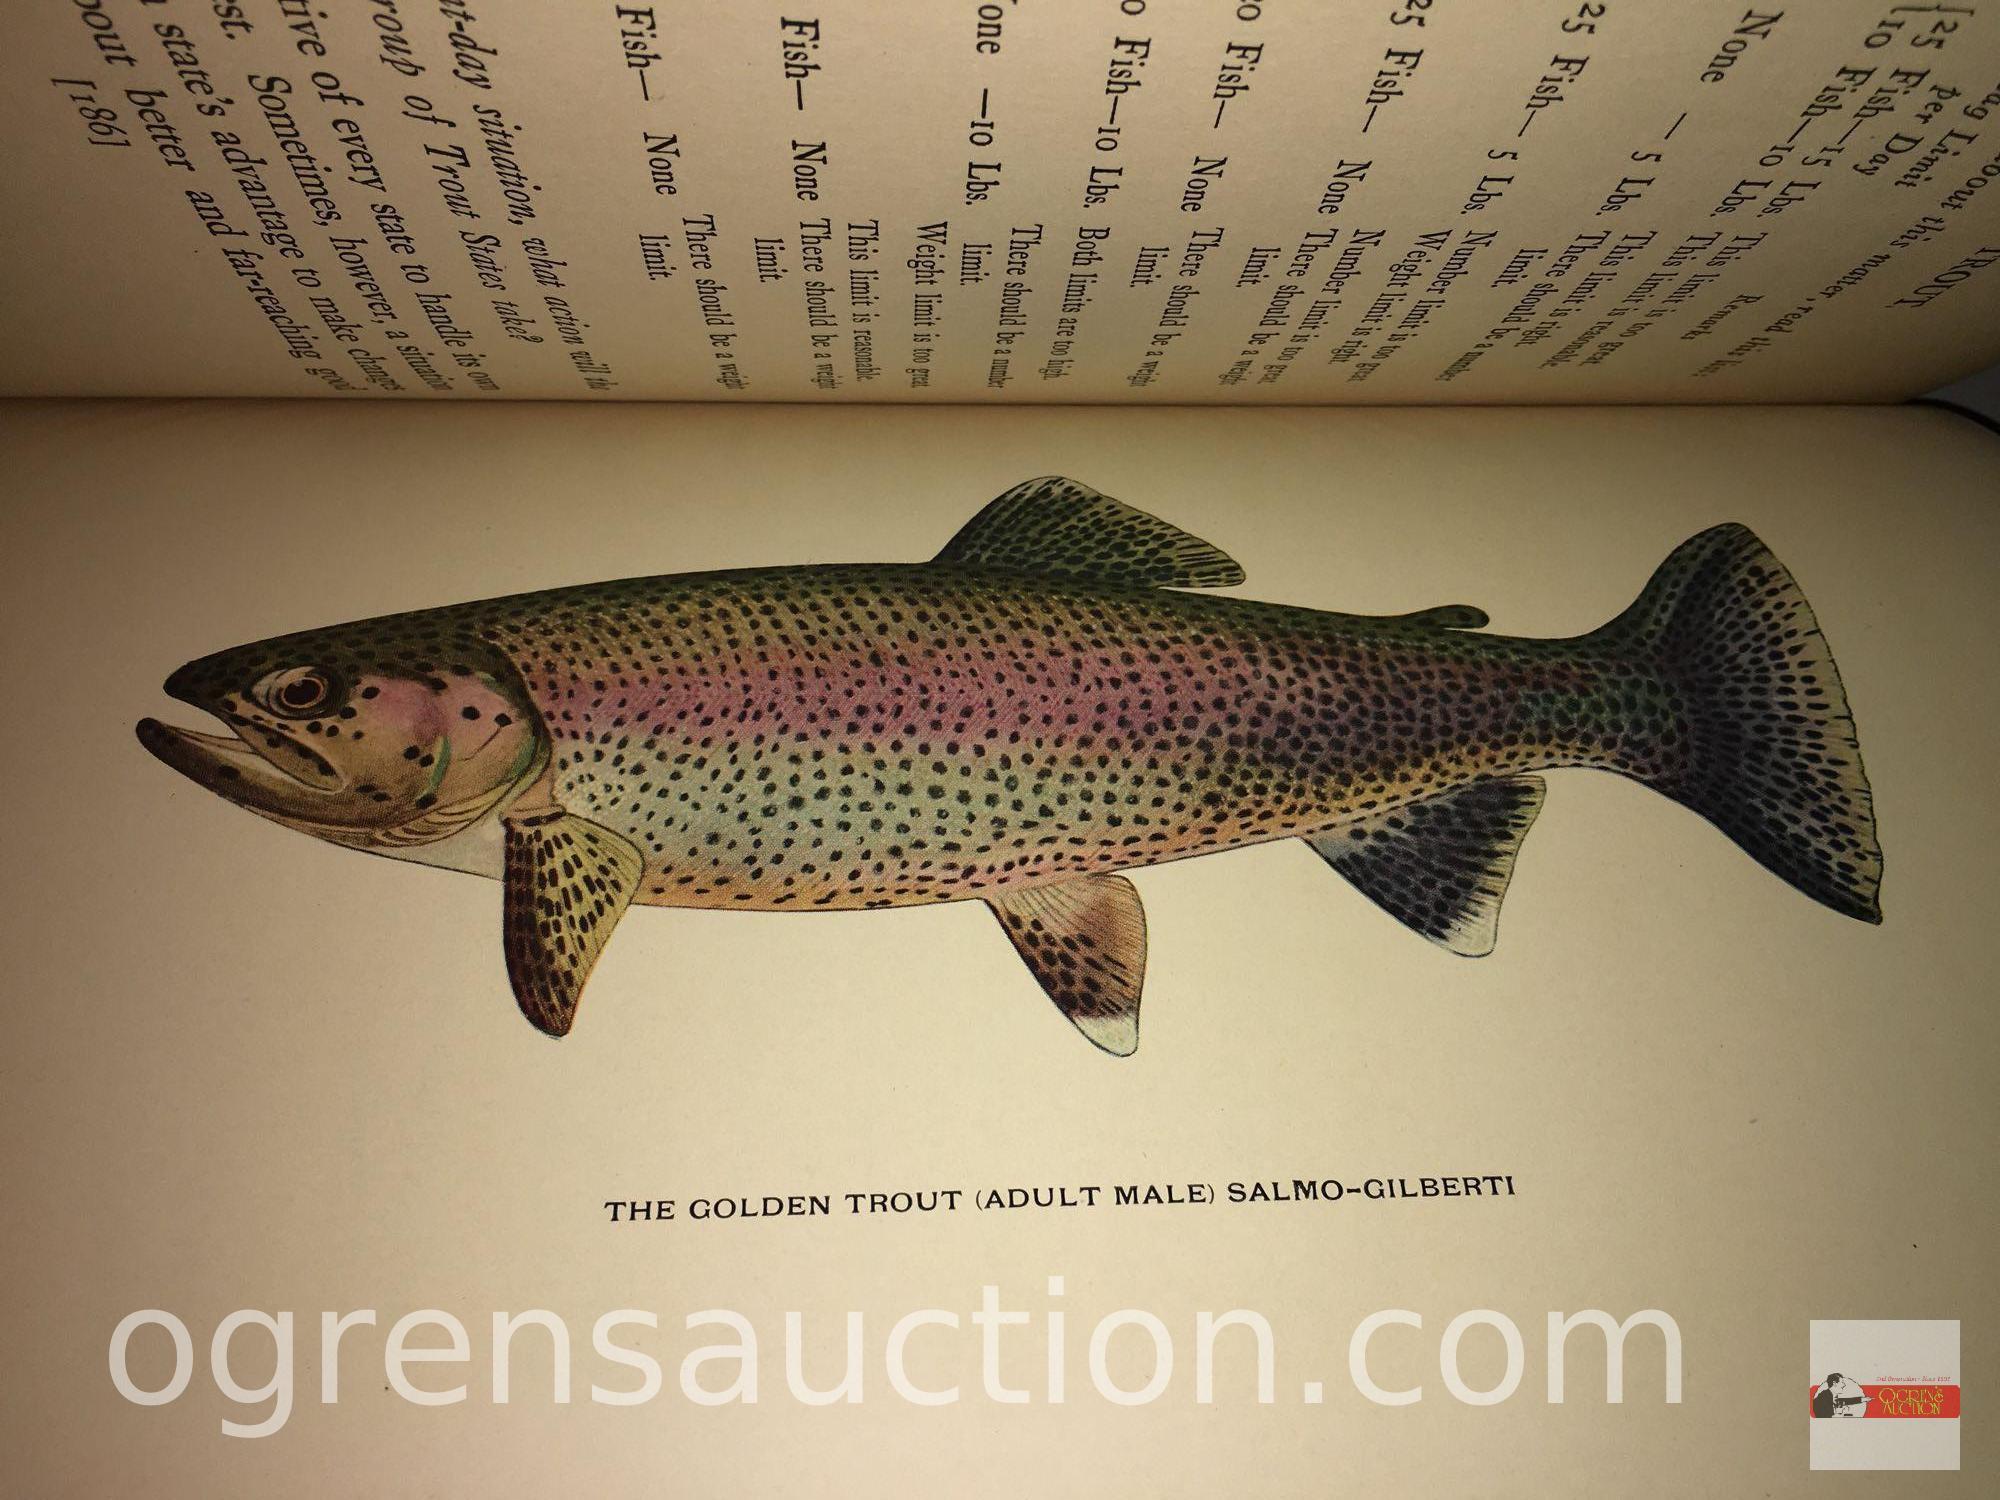 Books - Fishing - 1928 The Evolution of Trout, Trout Fishing in America by Charles Zibeon Southard